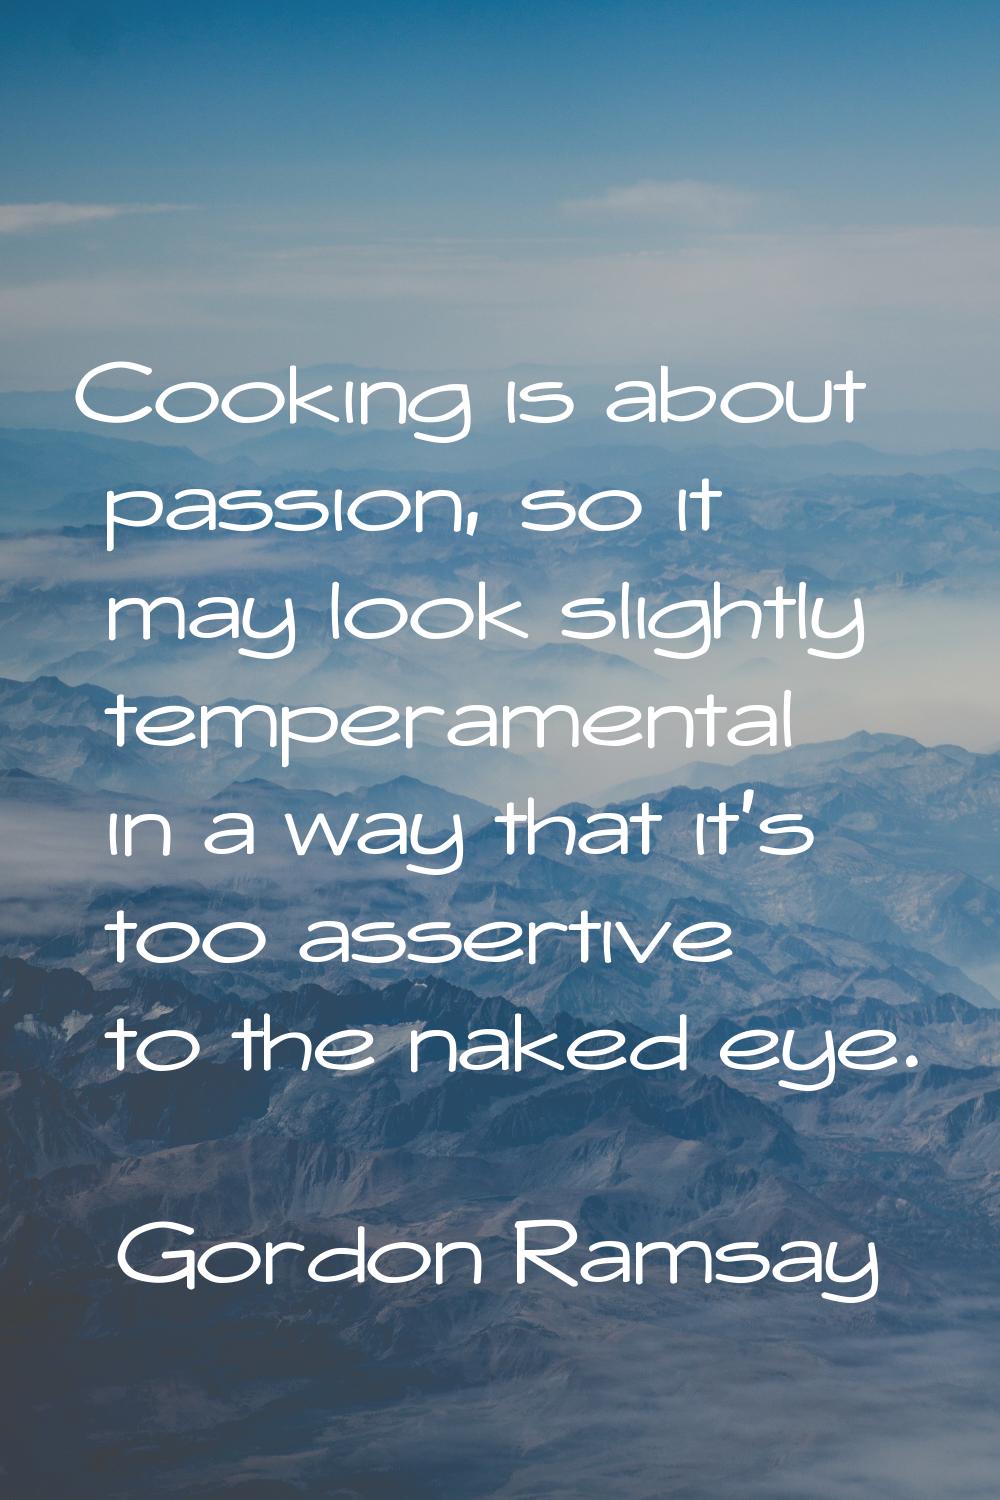 Cooking is about passion, so it may look slightly temperamental in a way that it's too assertive to